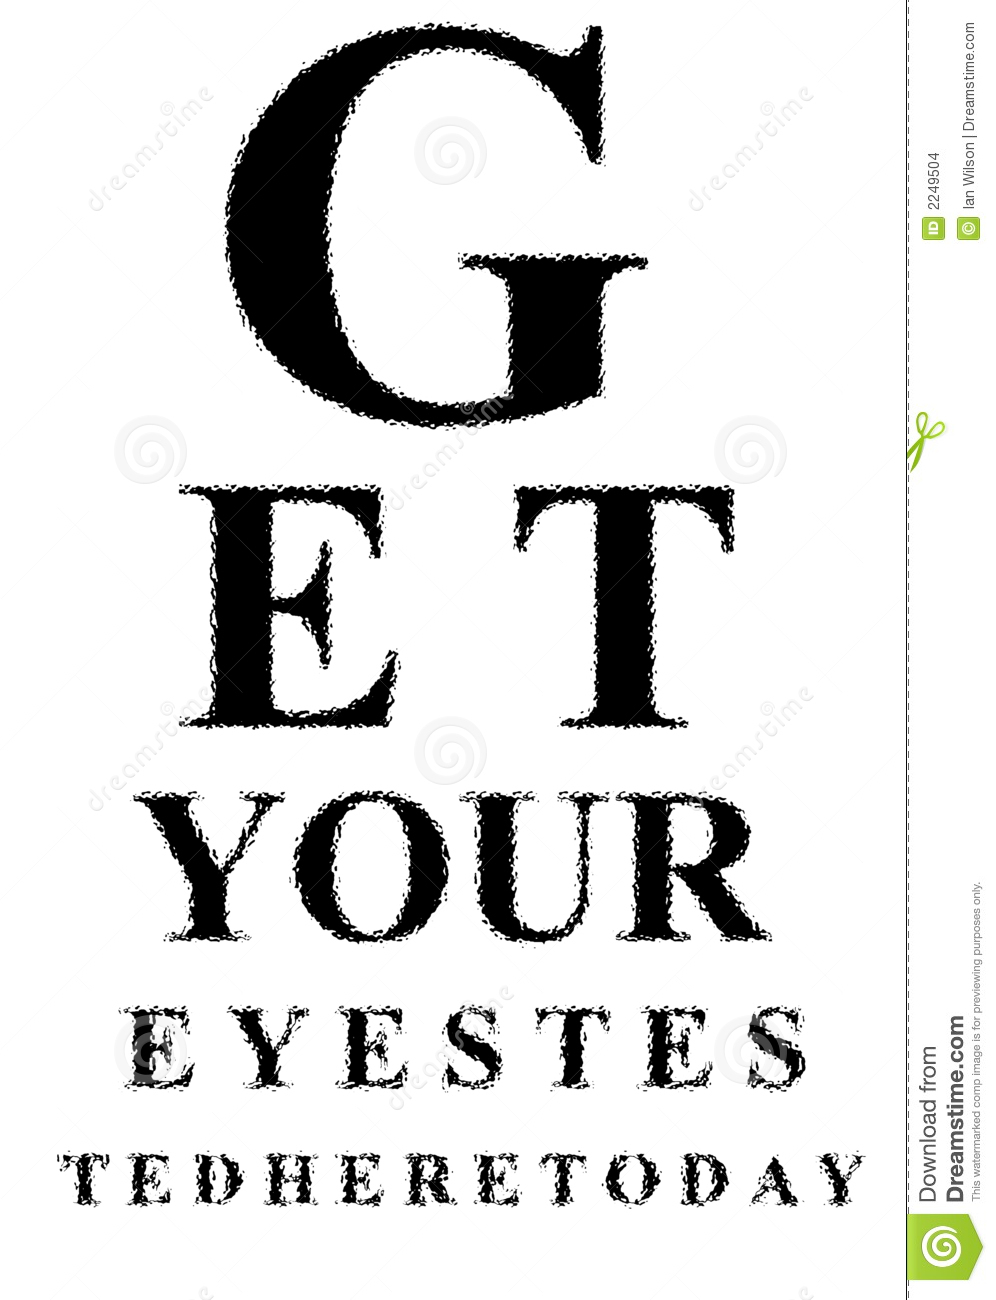 An Eye Test Chart Spelling Out The Message Get Your Eyes Tested Here